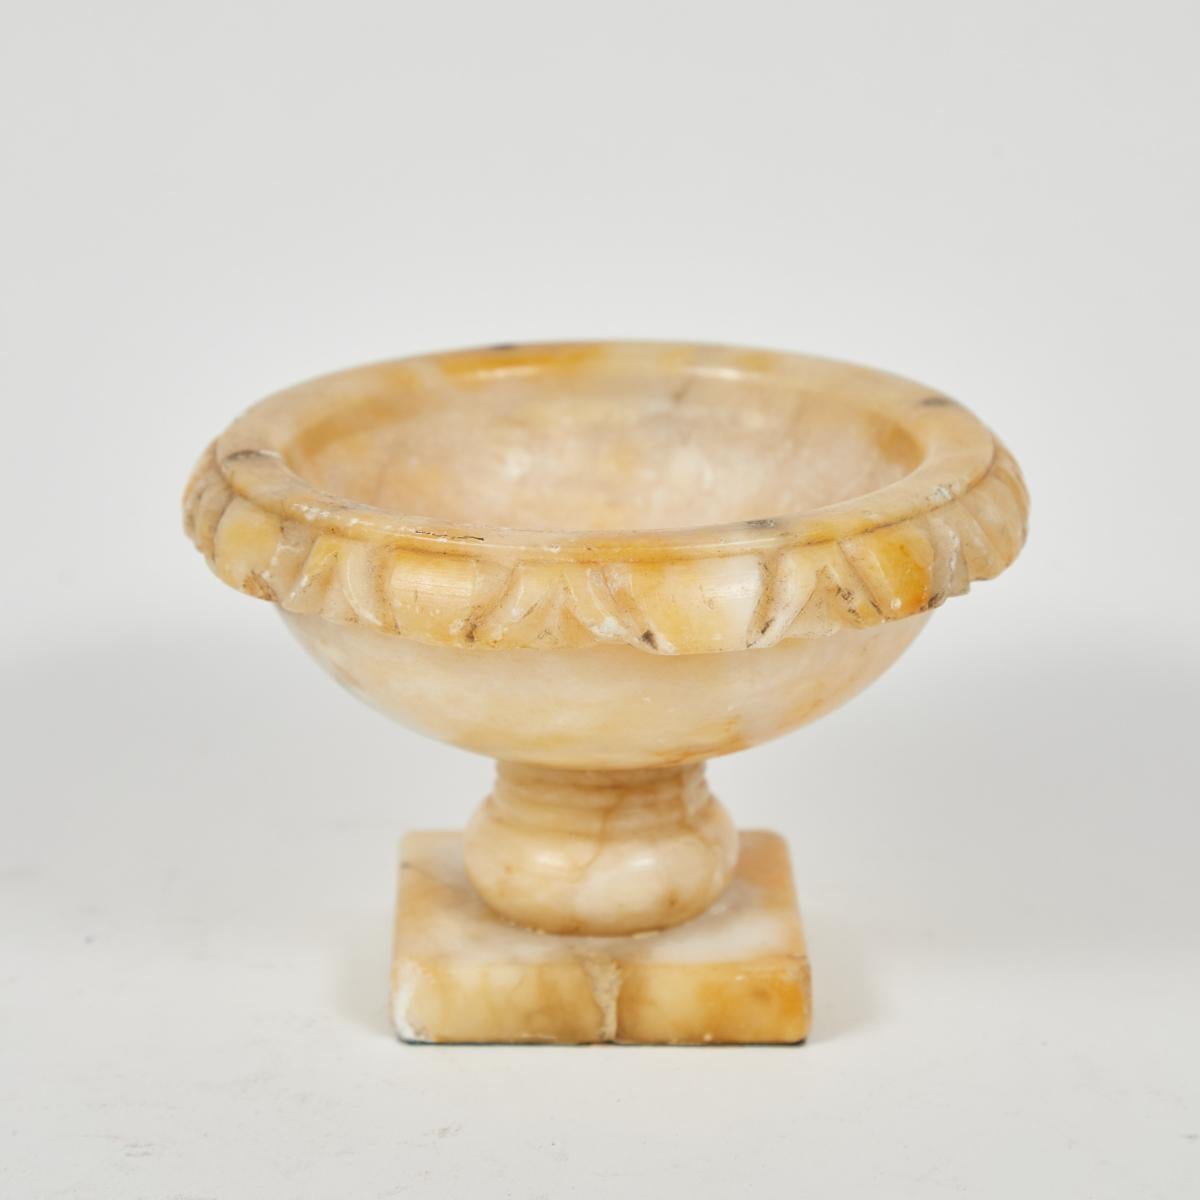 Set of three 18th-century Italian alabaster tazzas or jardinieres in graduating sizes. With a warm, sunny hue, rounded egg and dart rim, and square pedestal bases, the set makes a classical, romantic addition to indoor and outdoor spaces